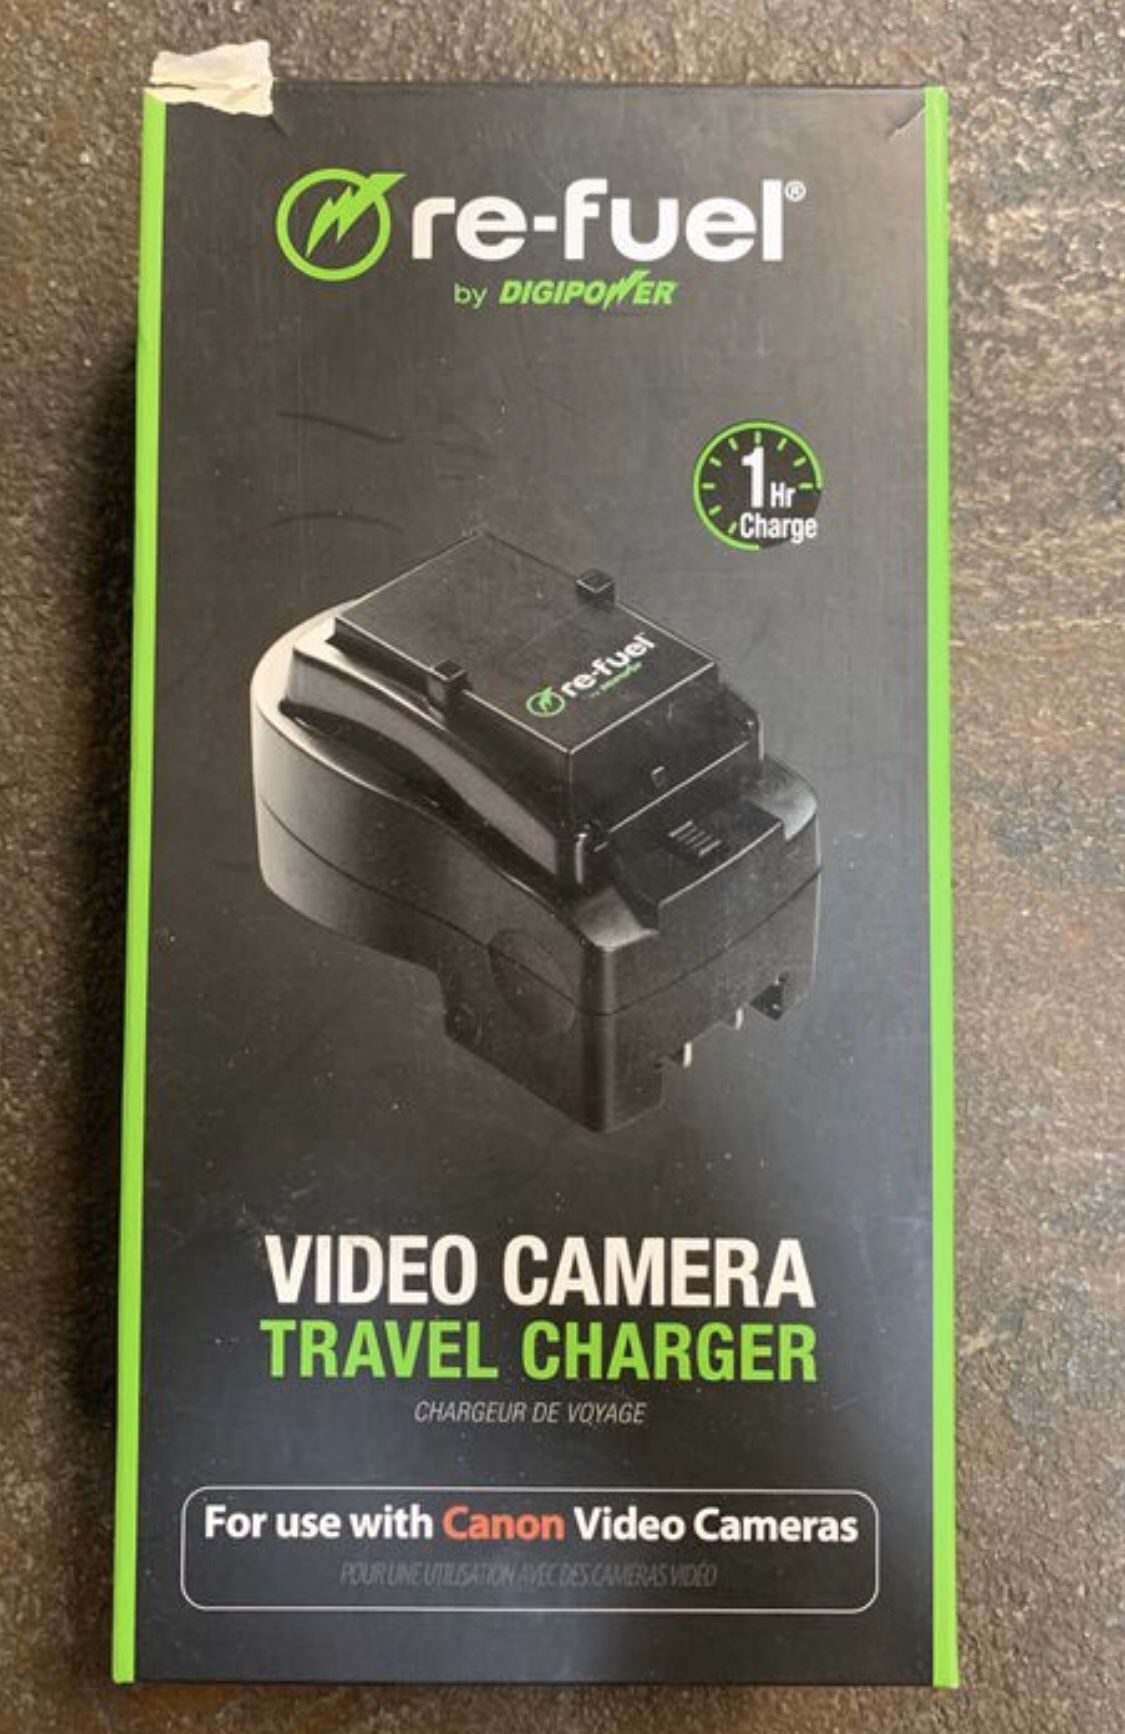 DIGIPOWER RE-FUEL RFVTC500C VIDEO CAMERA TRAVEL CHARGER FOR CANON CAMERA BATTERY